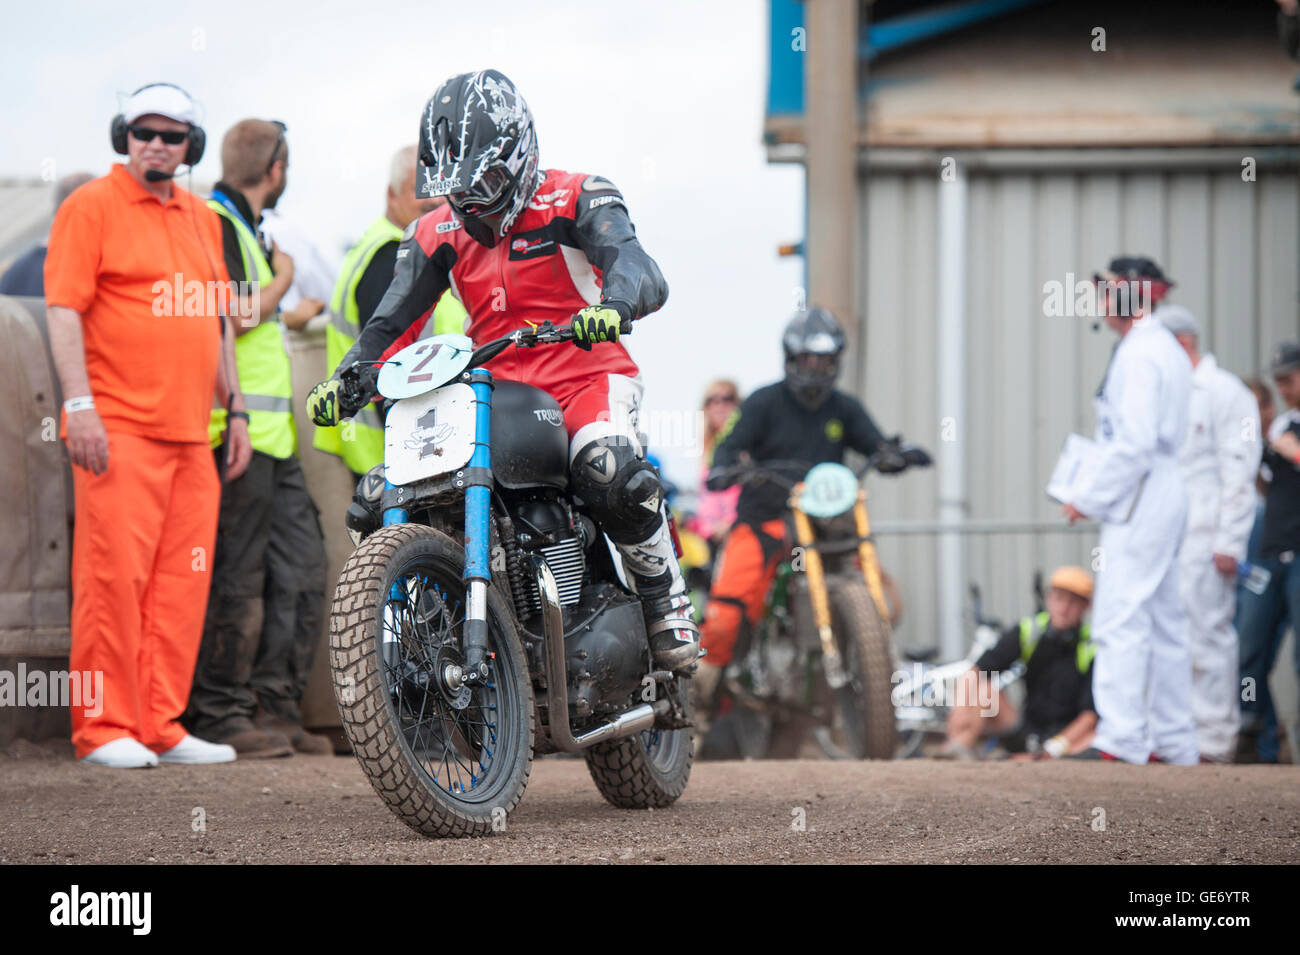 Kings Lynn, Norfolk, United Kingdom. 16.07.2016. Fifth annual Dirt Quake festival with Guy Martin and Carl 'Foggy' Fogarty (pictured) Stock Photo